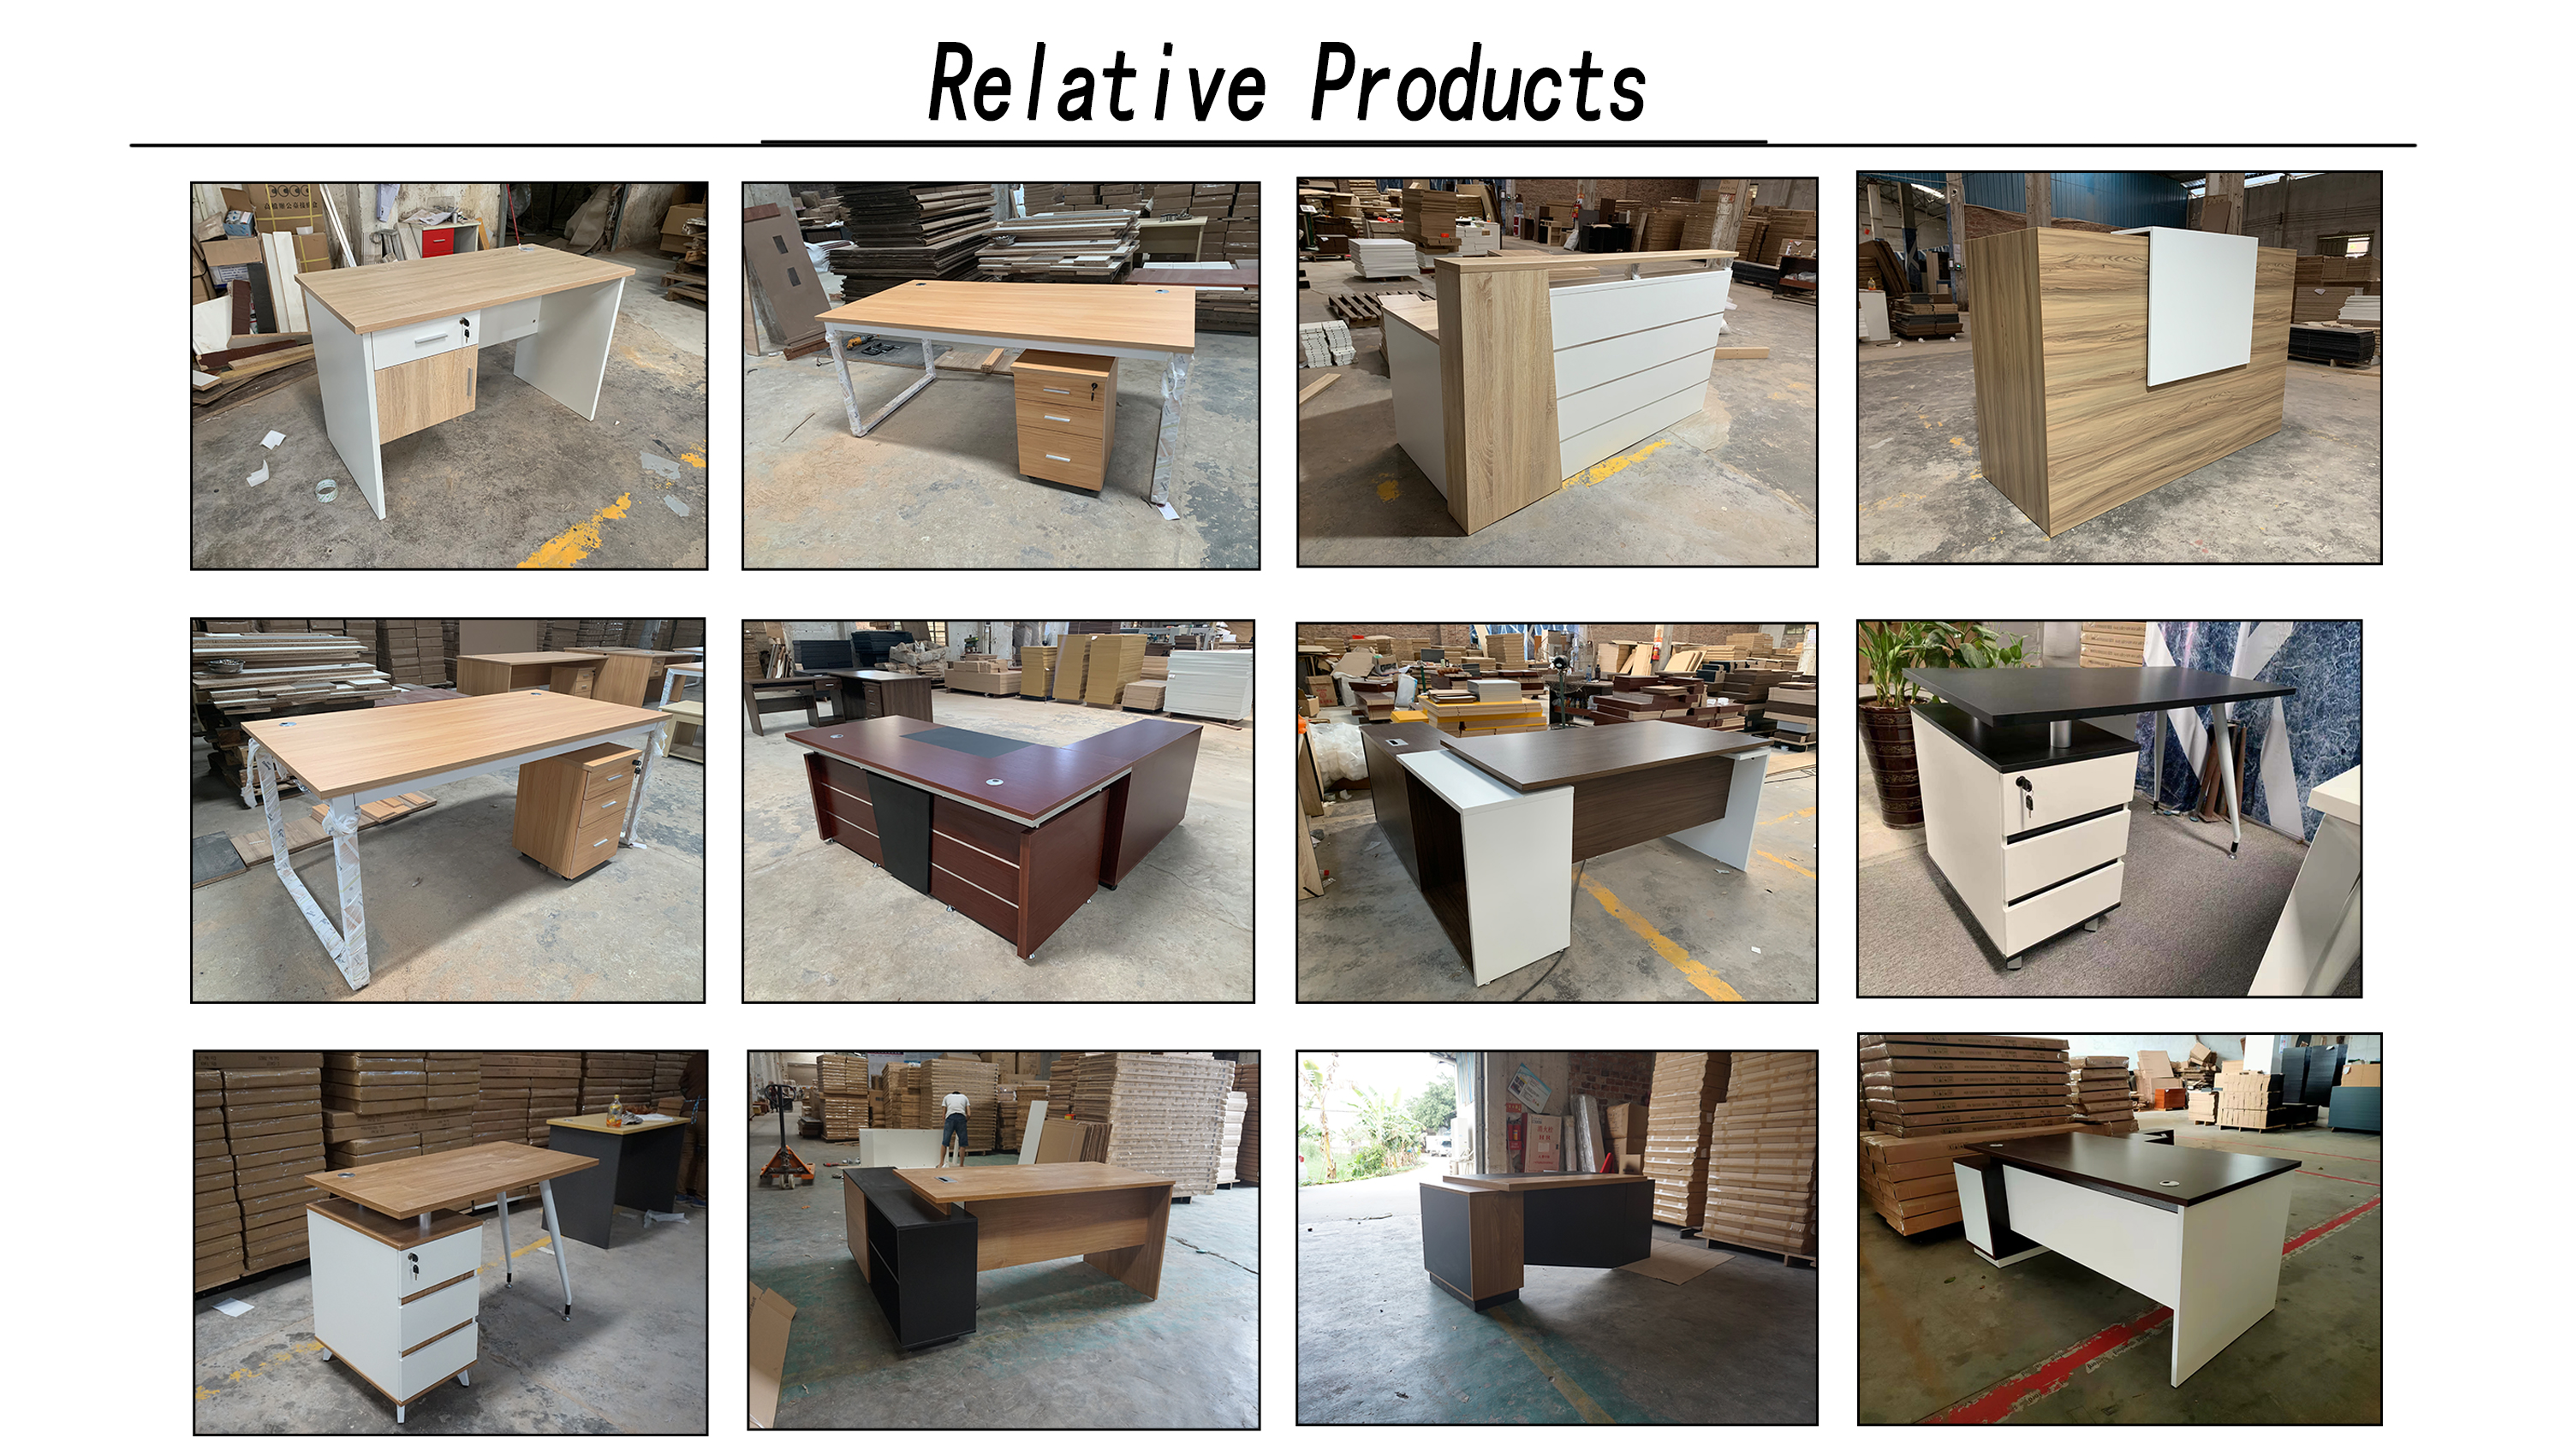 Relative Products